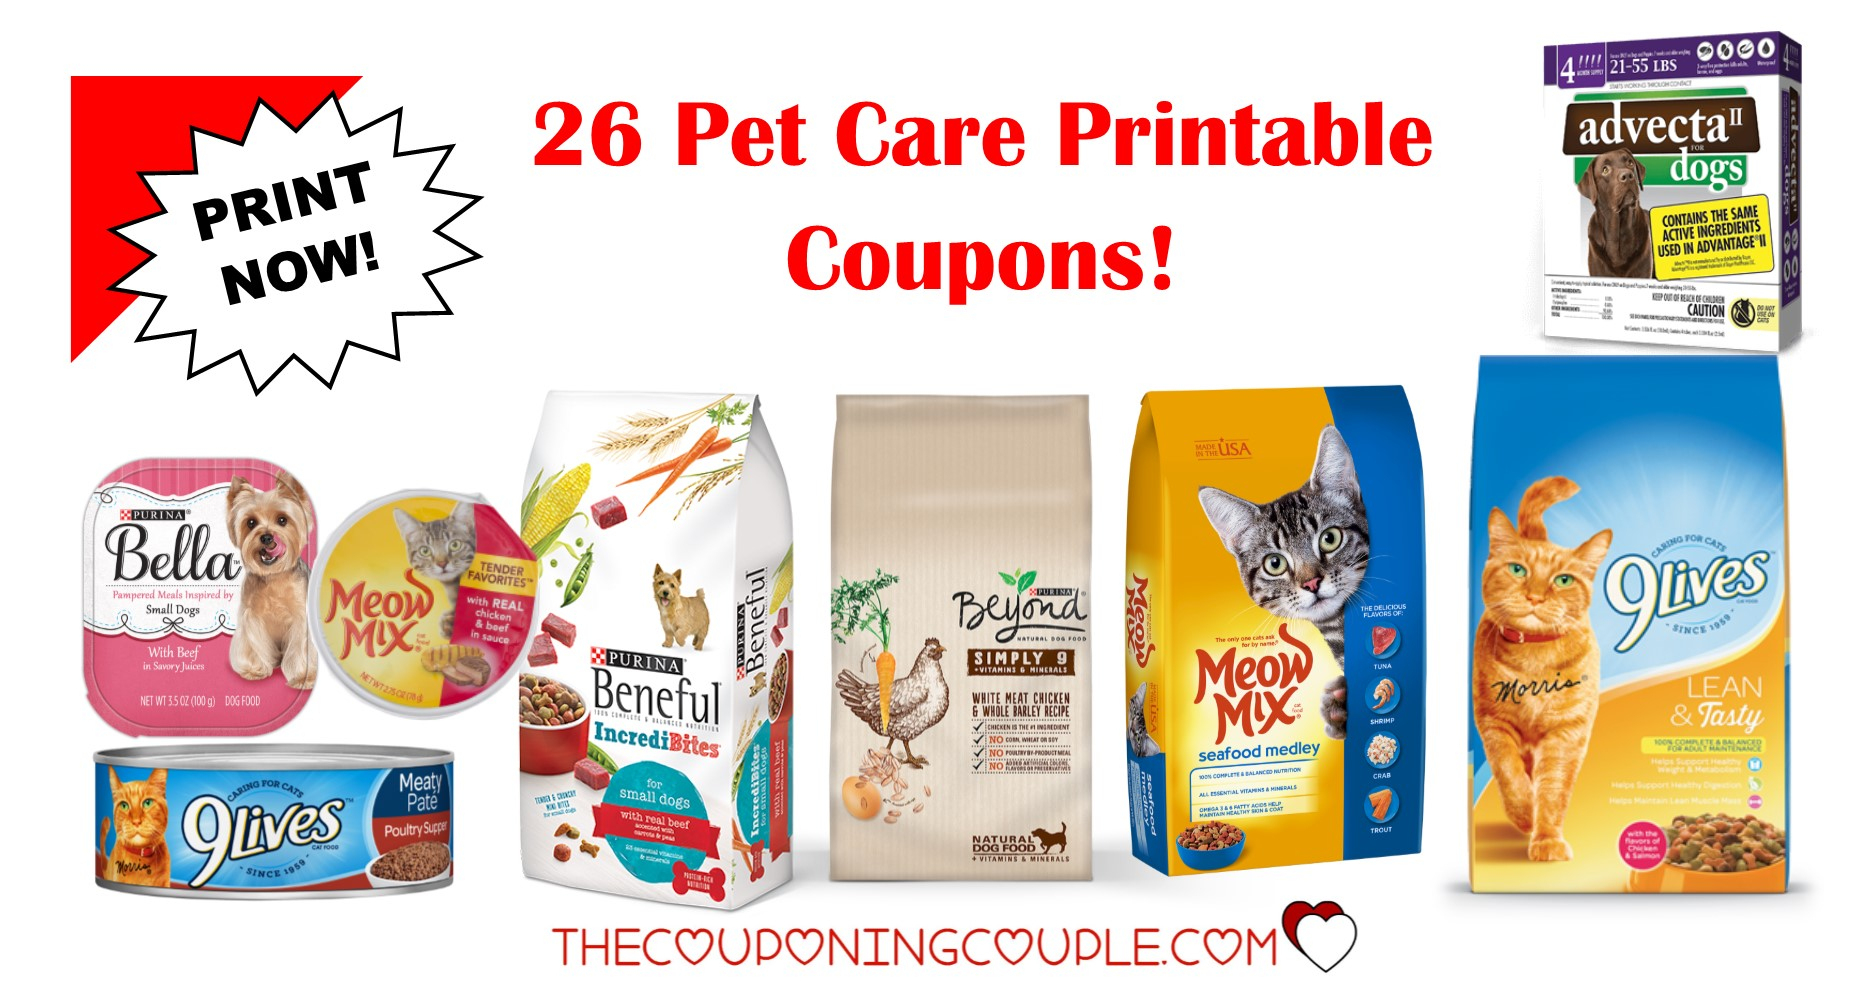 26 Pet Care Printable Coupons ~ Over $42 In Savings!!! - Free Printable 9 Lives Cat Food Coupons